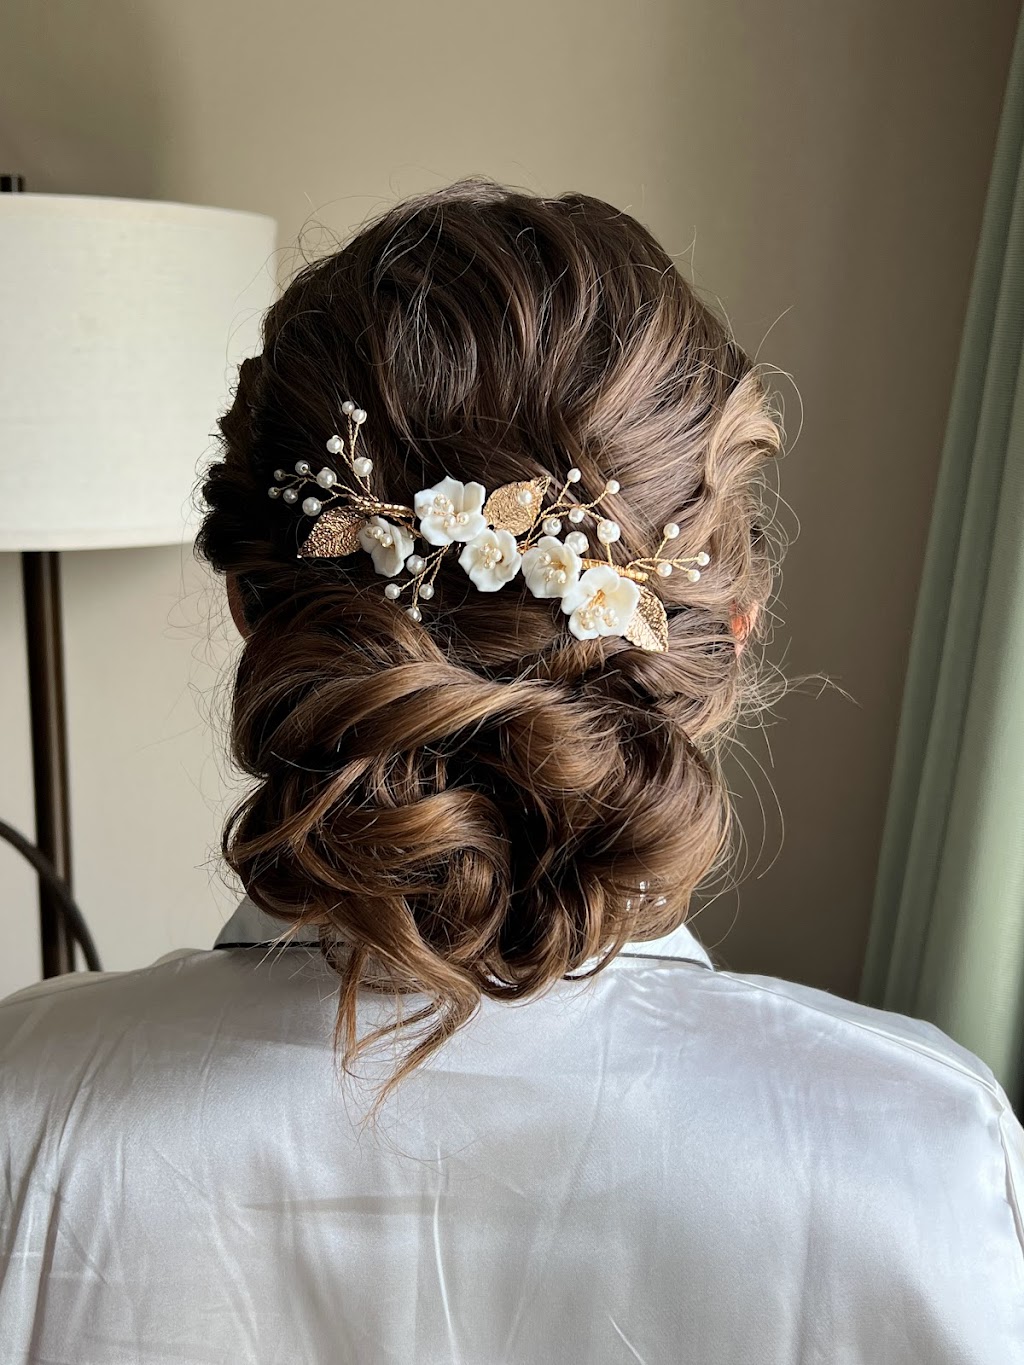 Justine Therese Hair / Moonstone Bridal | 320 College Hwy, Southwick, MA 01077 | Phone: (860) 268-2073